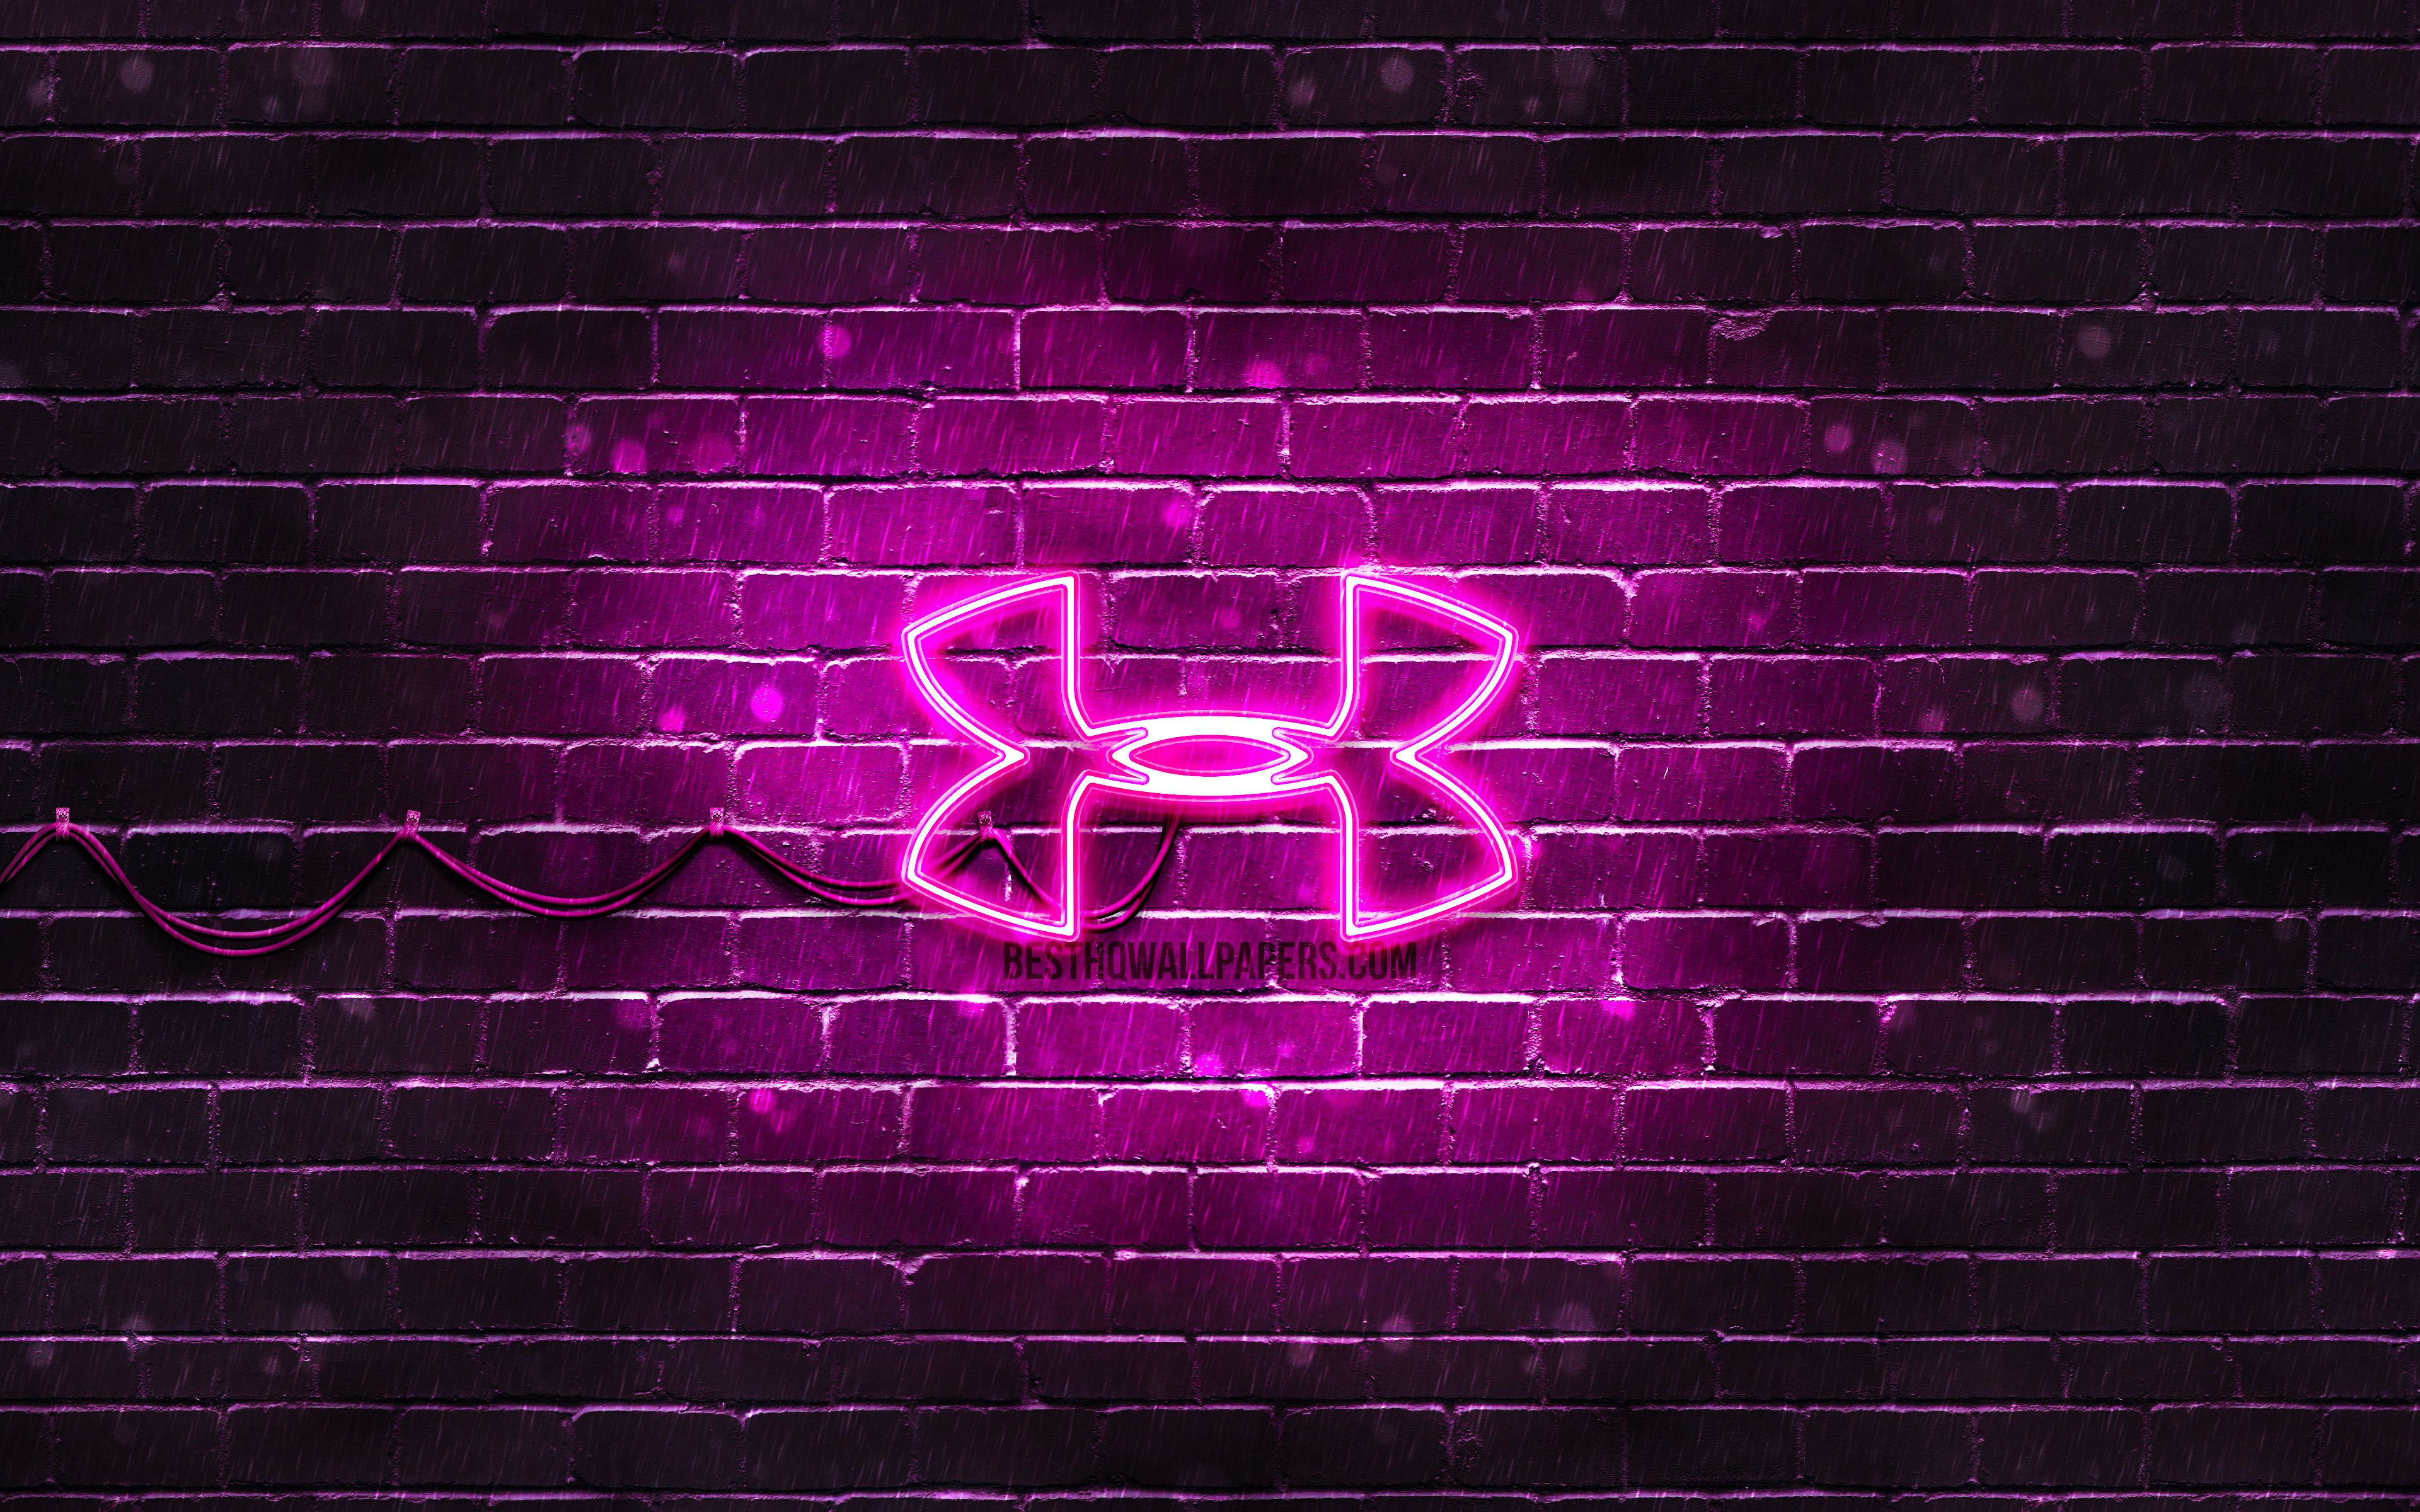 Download wallpaper Under Armour purple logo, 4k, purple brickwall, Under Armour logo, sports brands, Under Armour neon logo, Under Armour for desktop with resolution 3840x2400. High Quality HD picture wallpaper